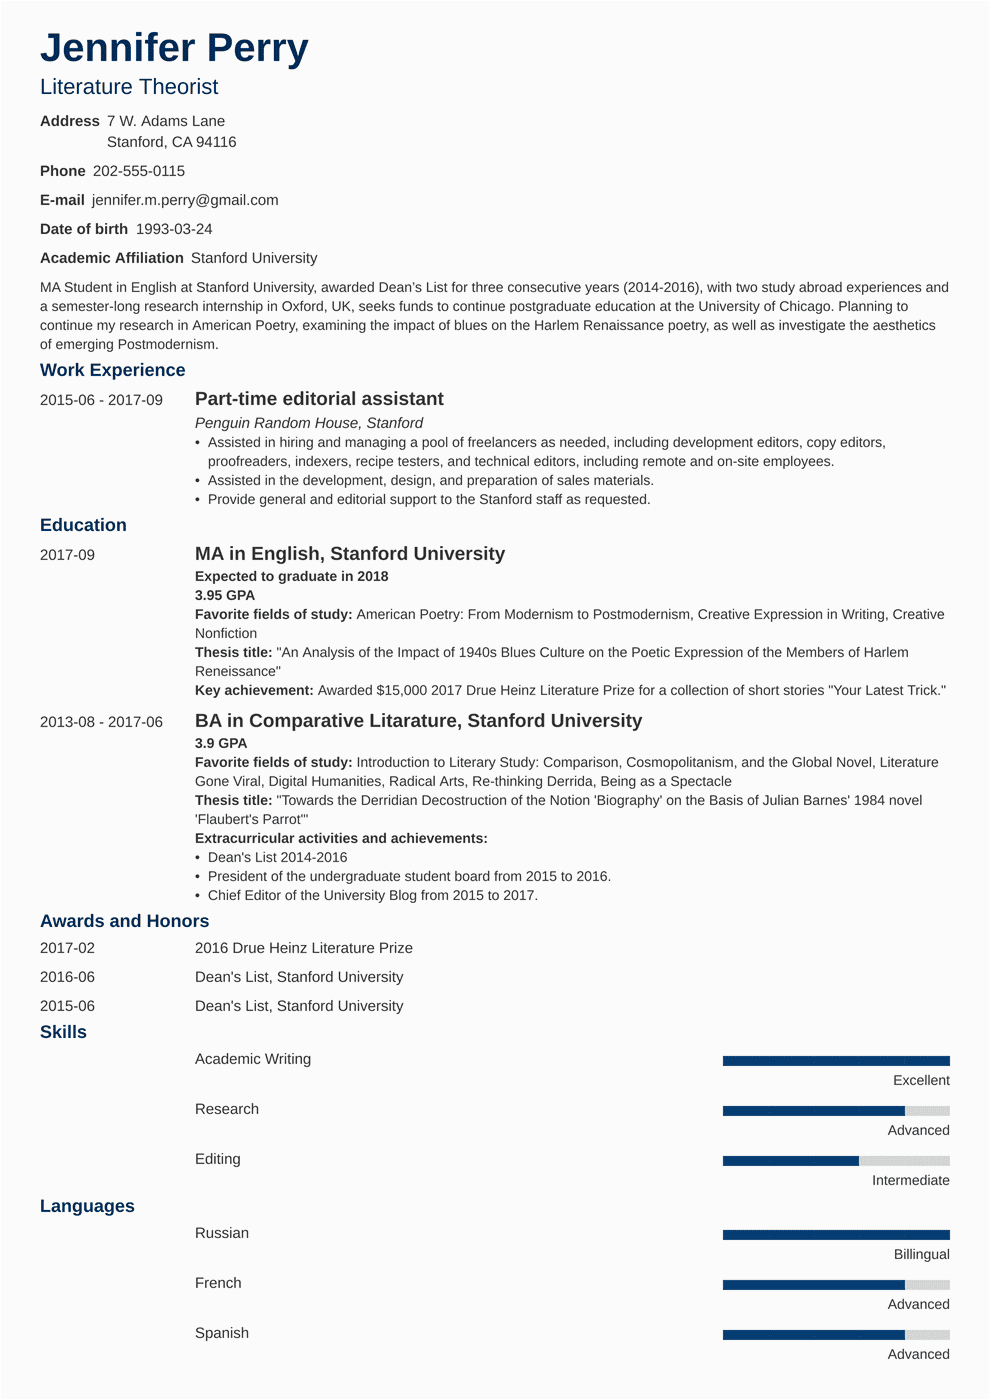 Sample Student Resume for Scholarship Application Scholarship Resume Examples [ Template with Objective]